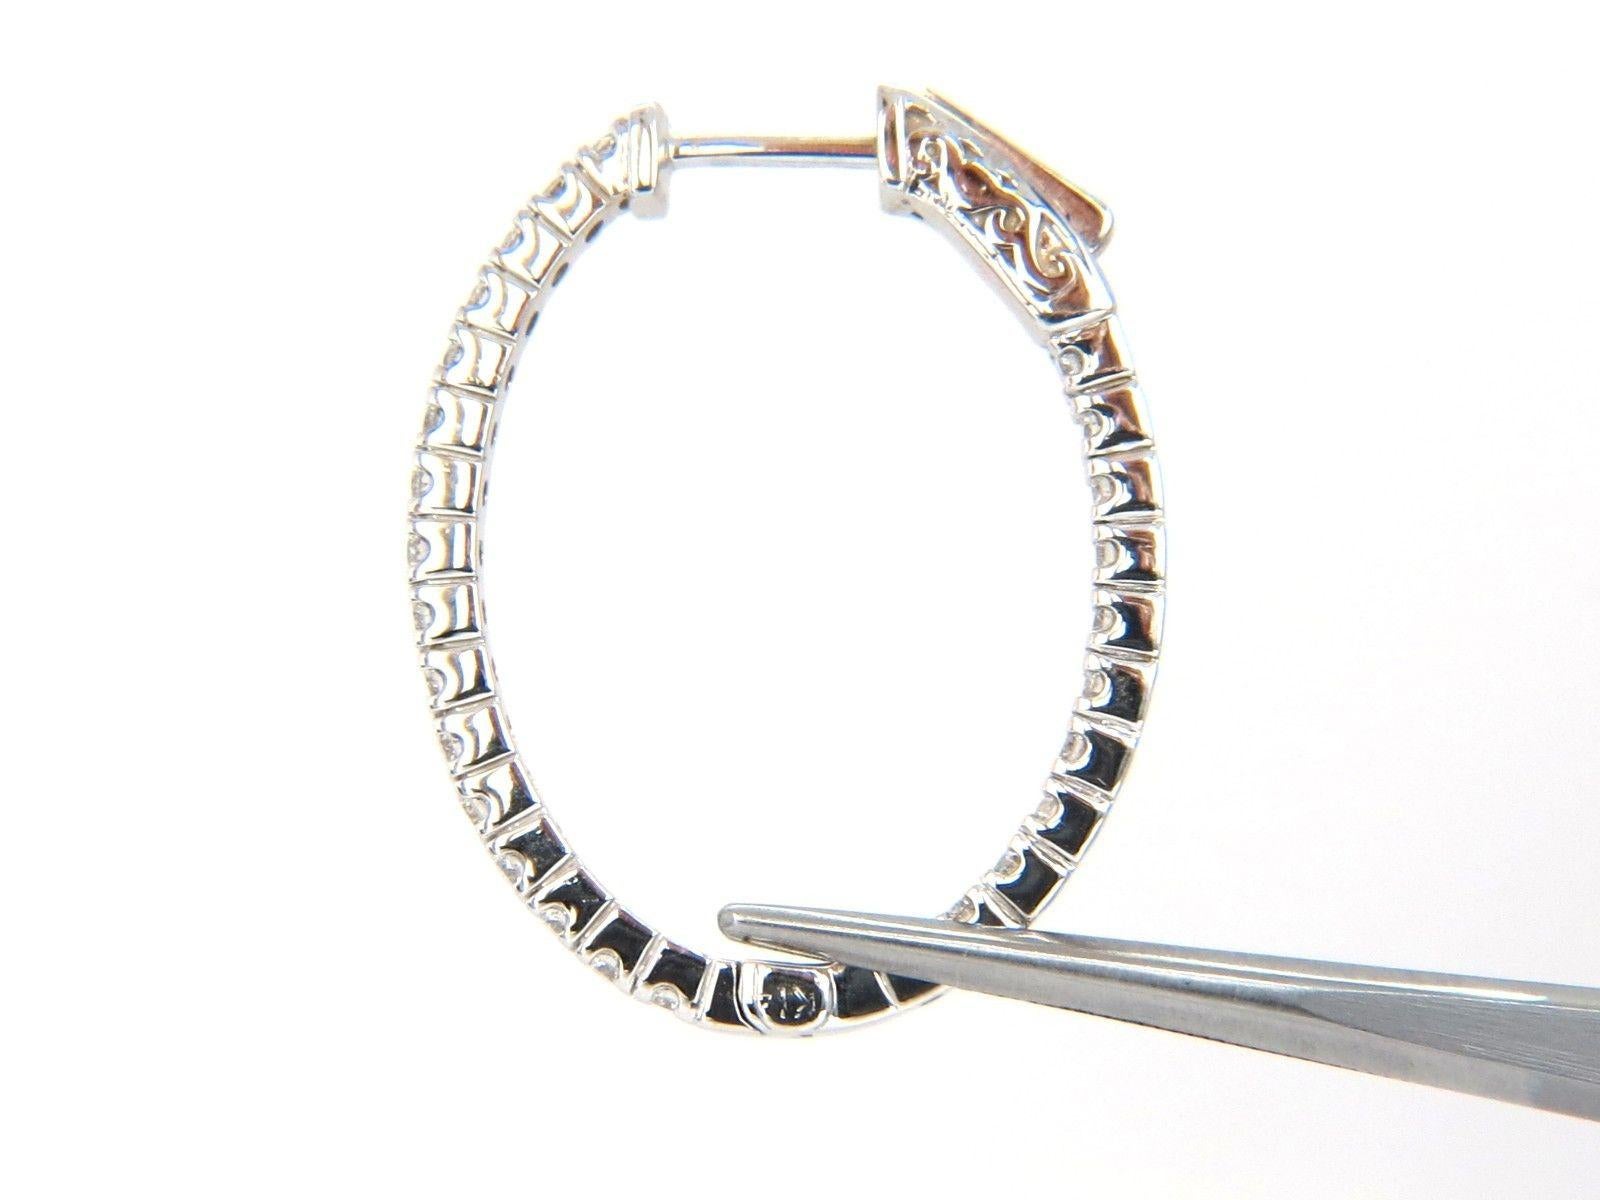 Elongated Hoop, Snap button closure & Inside out

1.33ct. Natural diamonds  

Rounds, Full cut brilliants.

G- color Vs-2 Clarity. 

Excellent detail.

14kt. white gold

6.5 grams.

.91 inch wide

1.15  inch long

2.00mm long

$3800 Appraisal